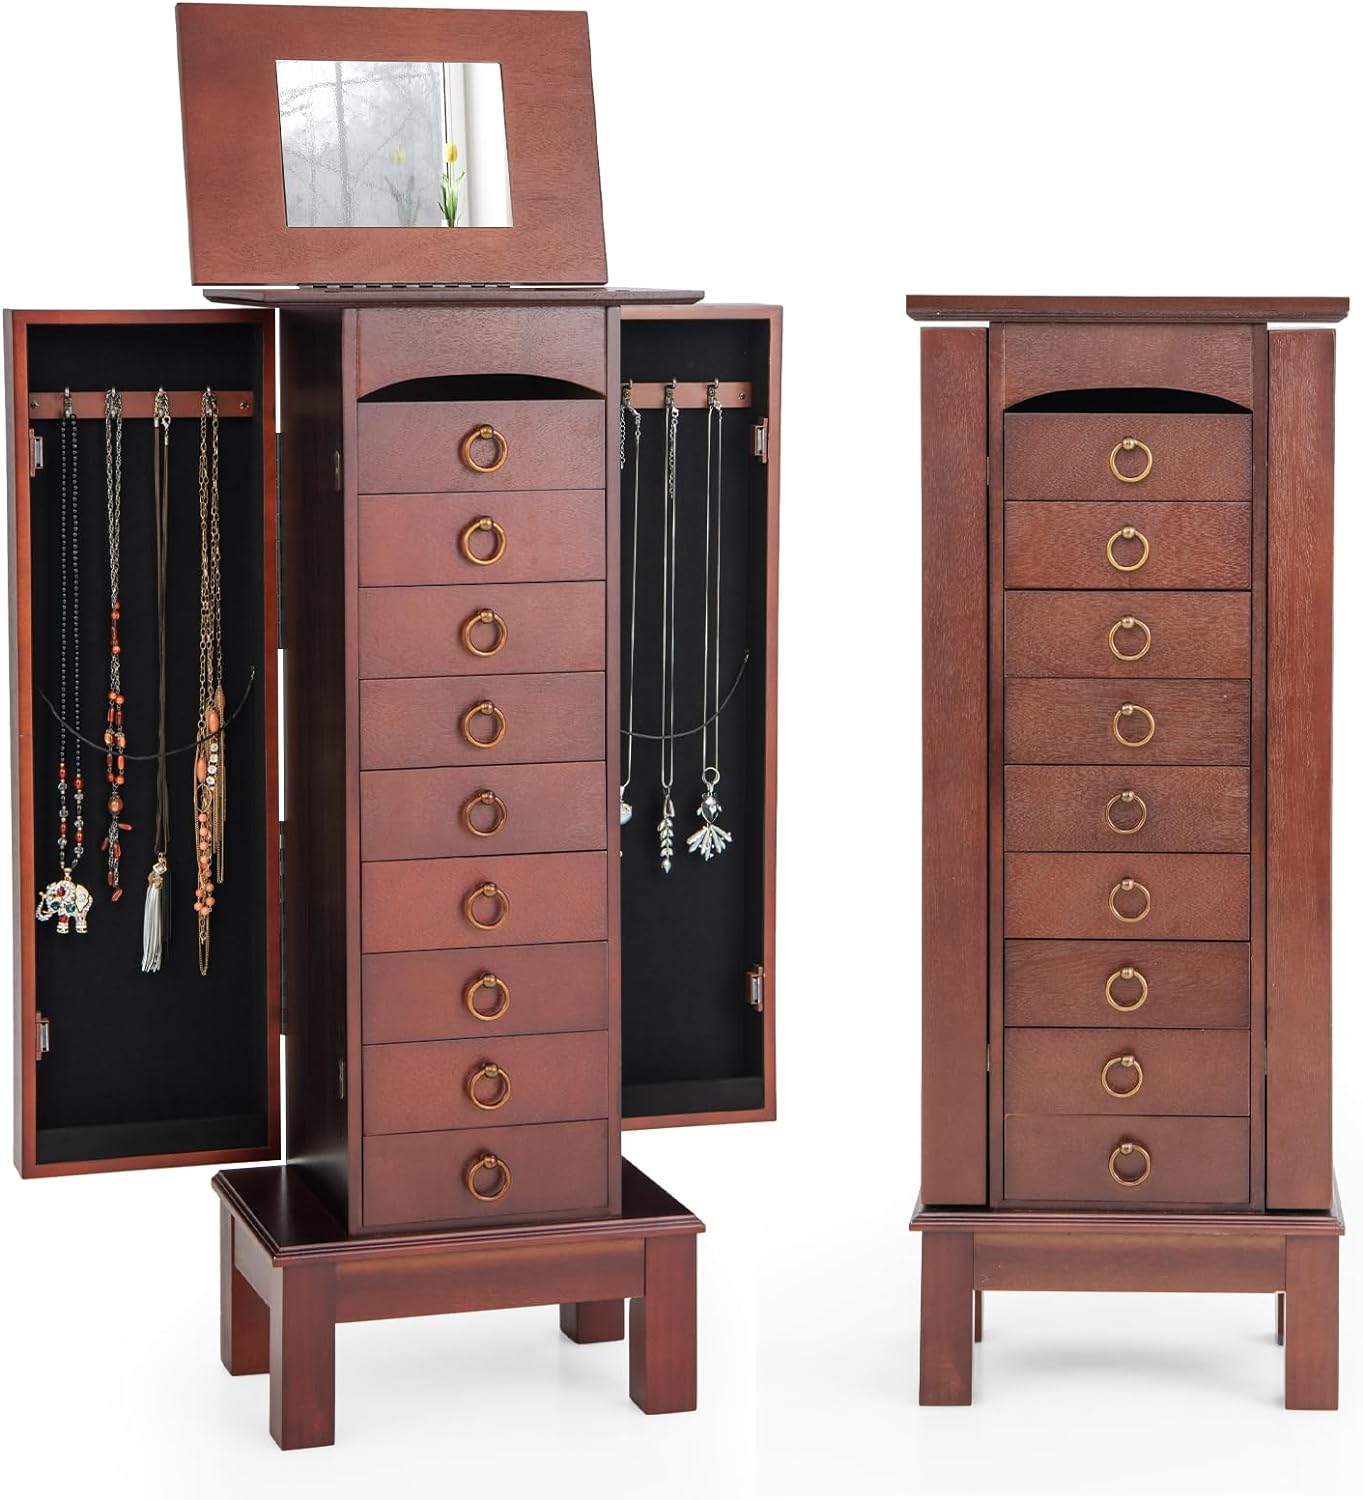 COSTWAY Standing Jewelry Cabinet, Wooden Jewelry Storage Chest with 9 Drawers, 2 Side Doors & Flip Top Mirror, Bedroom Jewelry Armoire with Top Divided Compartments